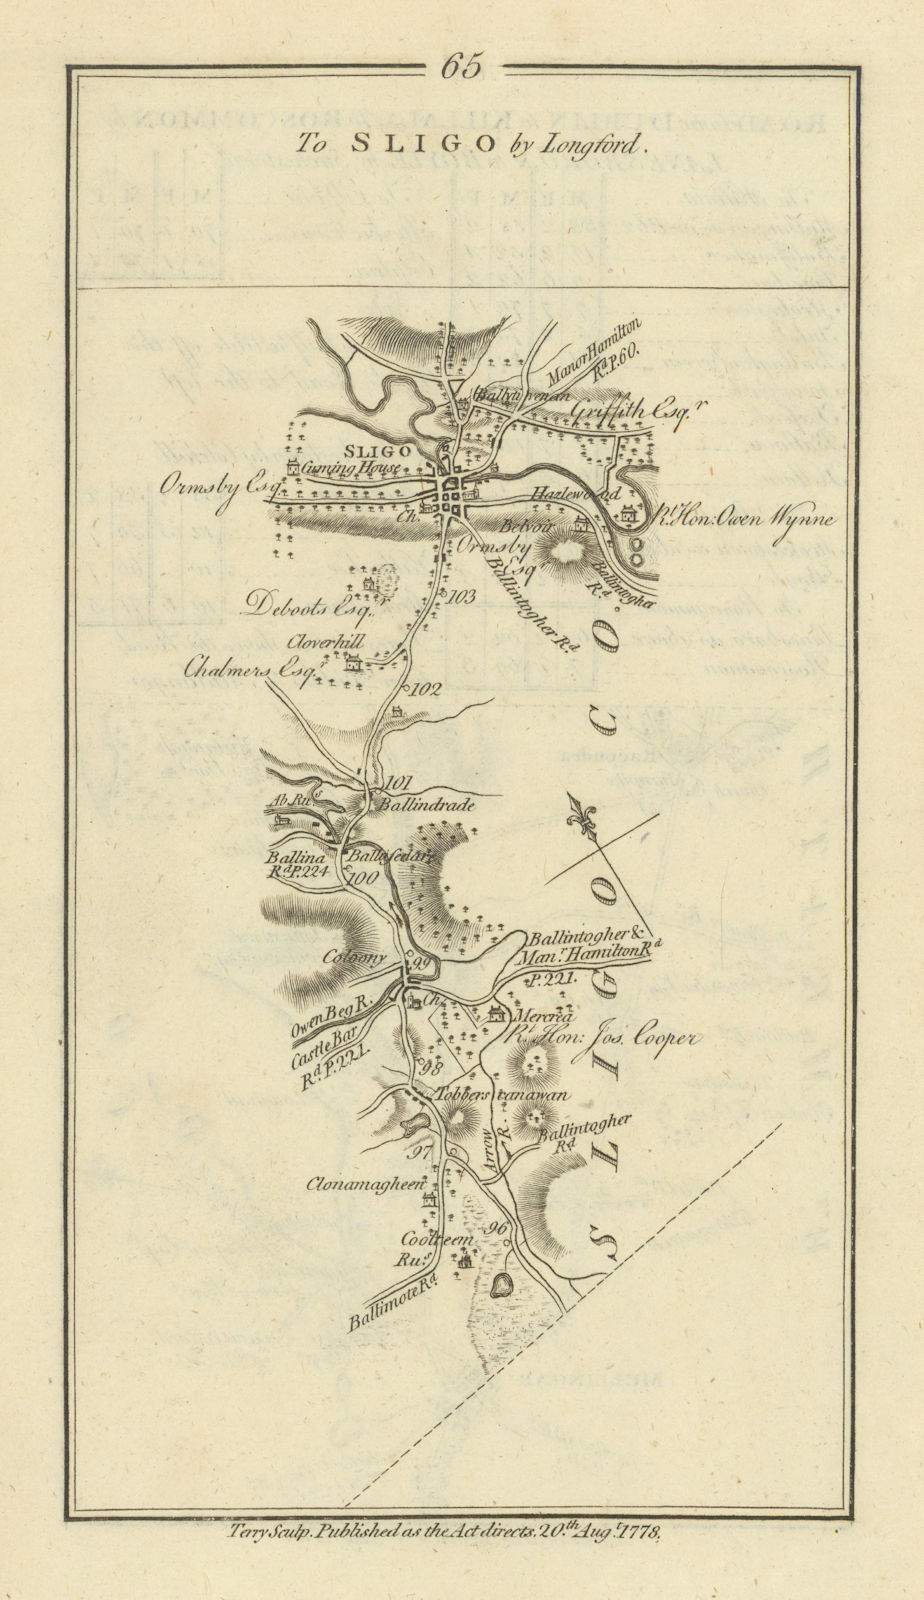 Associate Product #65 [Road from Dublin] to Sligo by Longford. Collooney. TAYLOR/SKINNER 1778 map